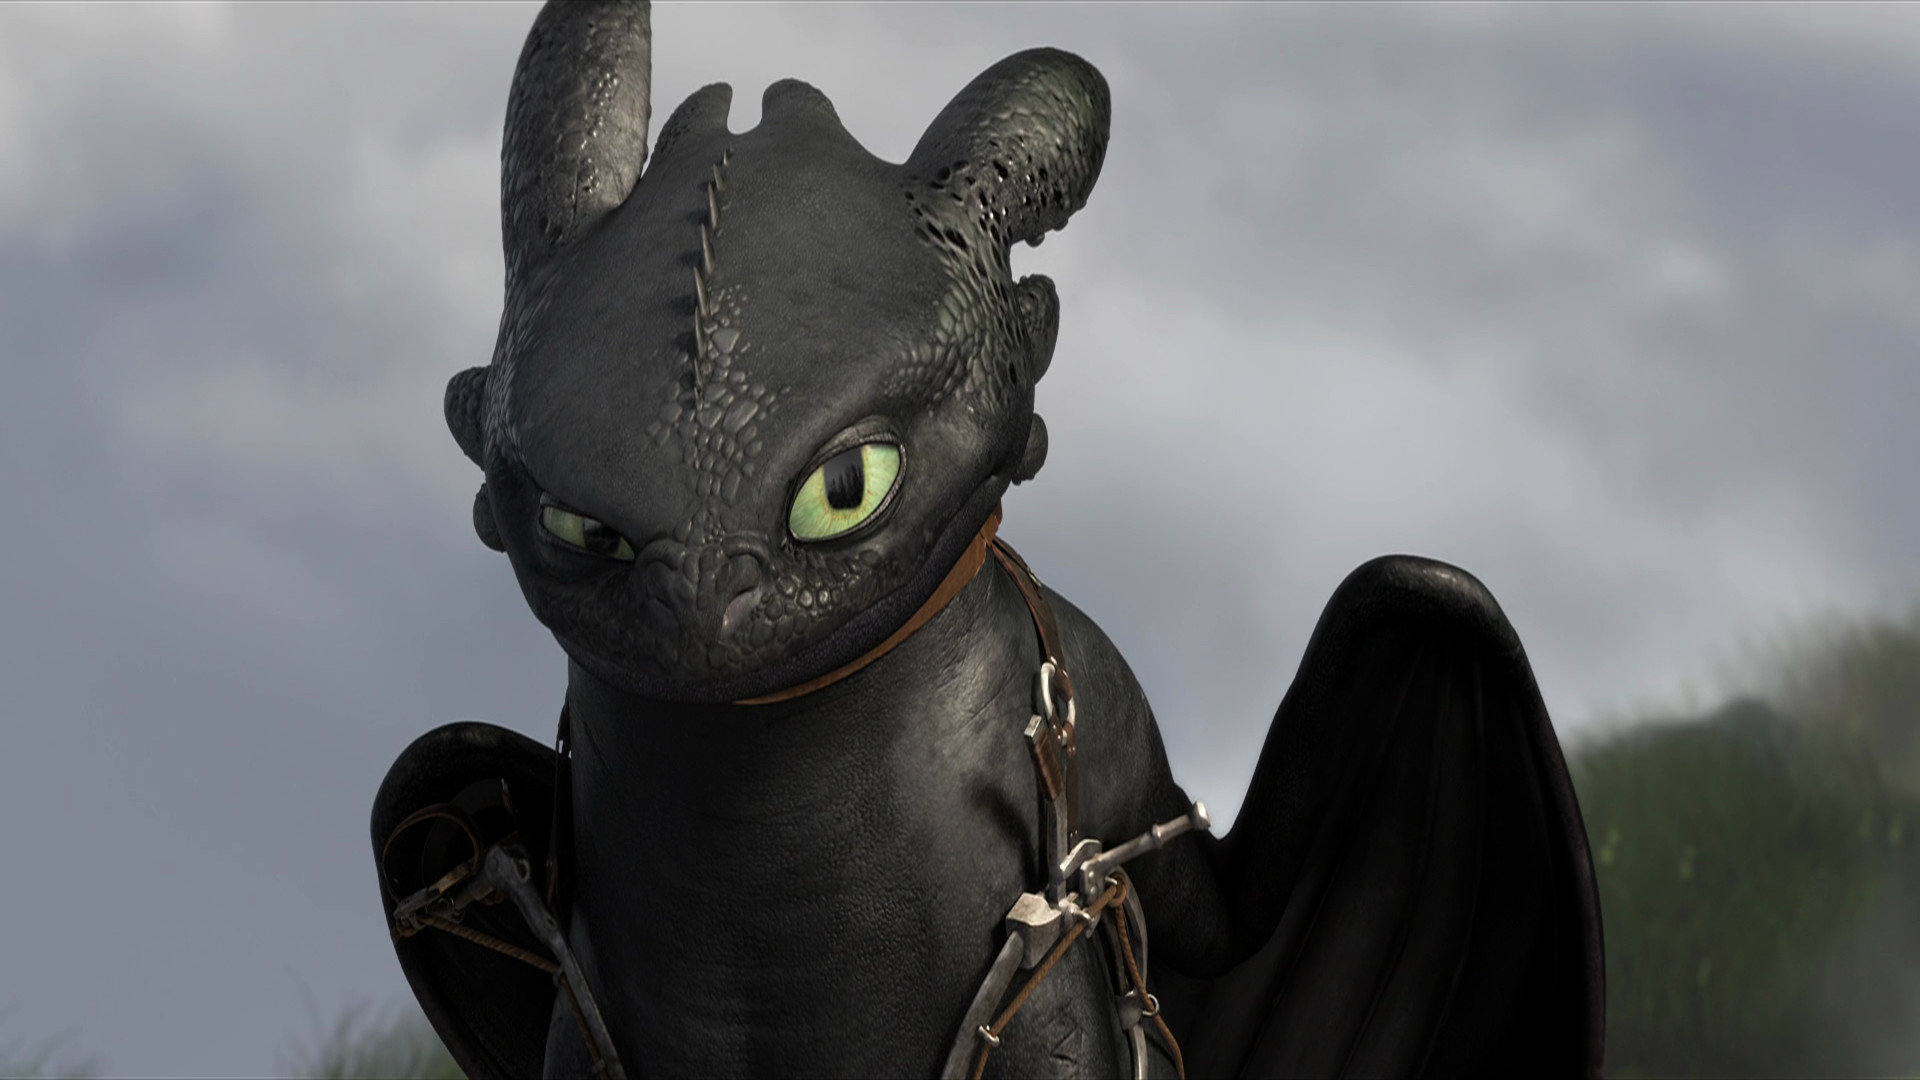 Download full hd 1920x1080 How To Train Your Dragon 2 desktop background ID:90207 for free